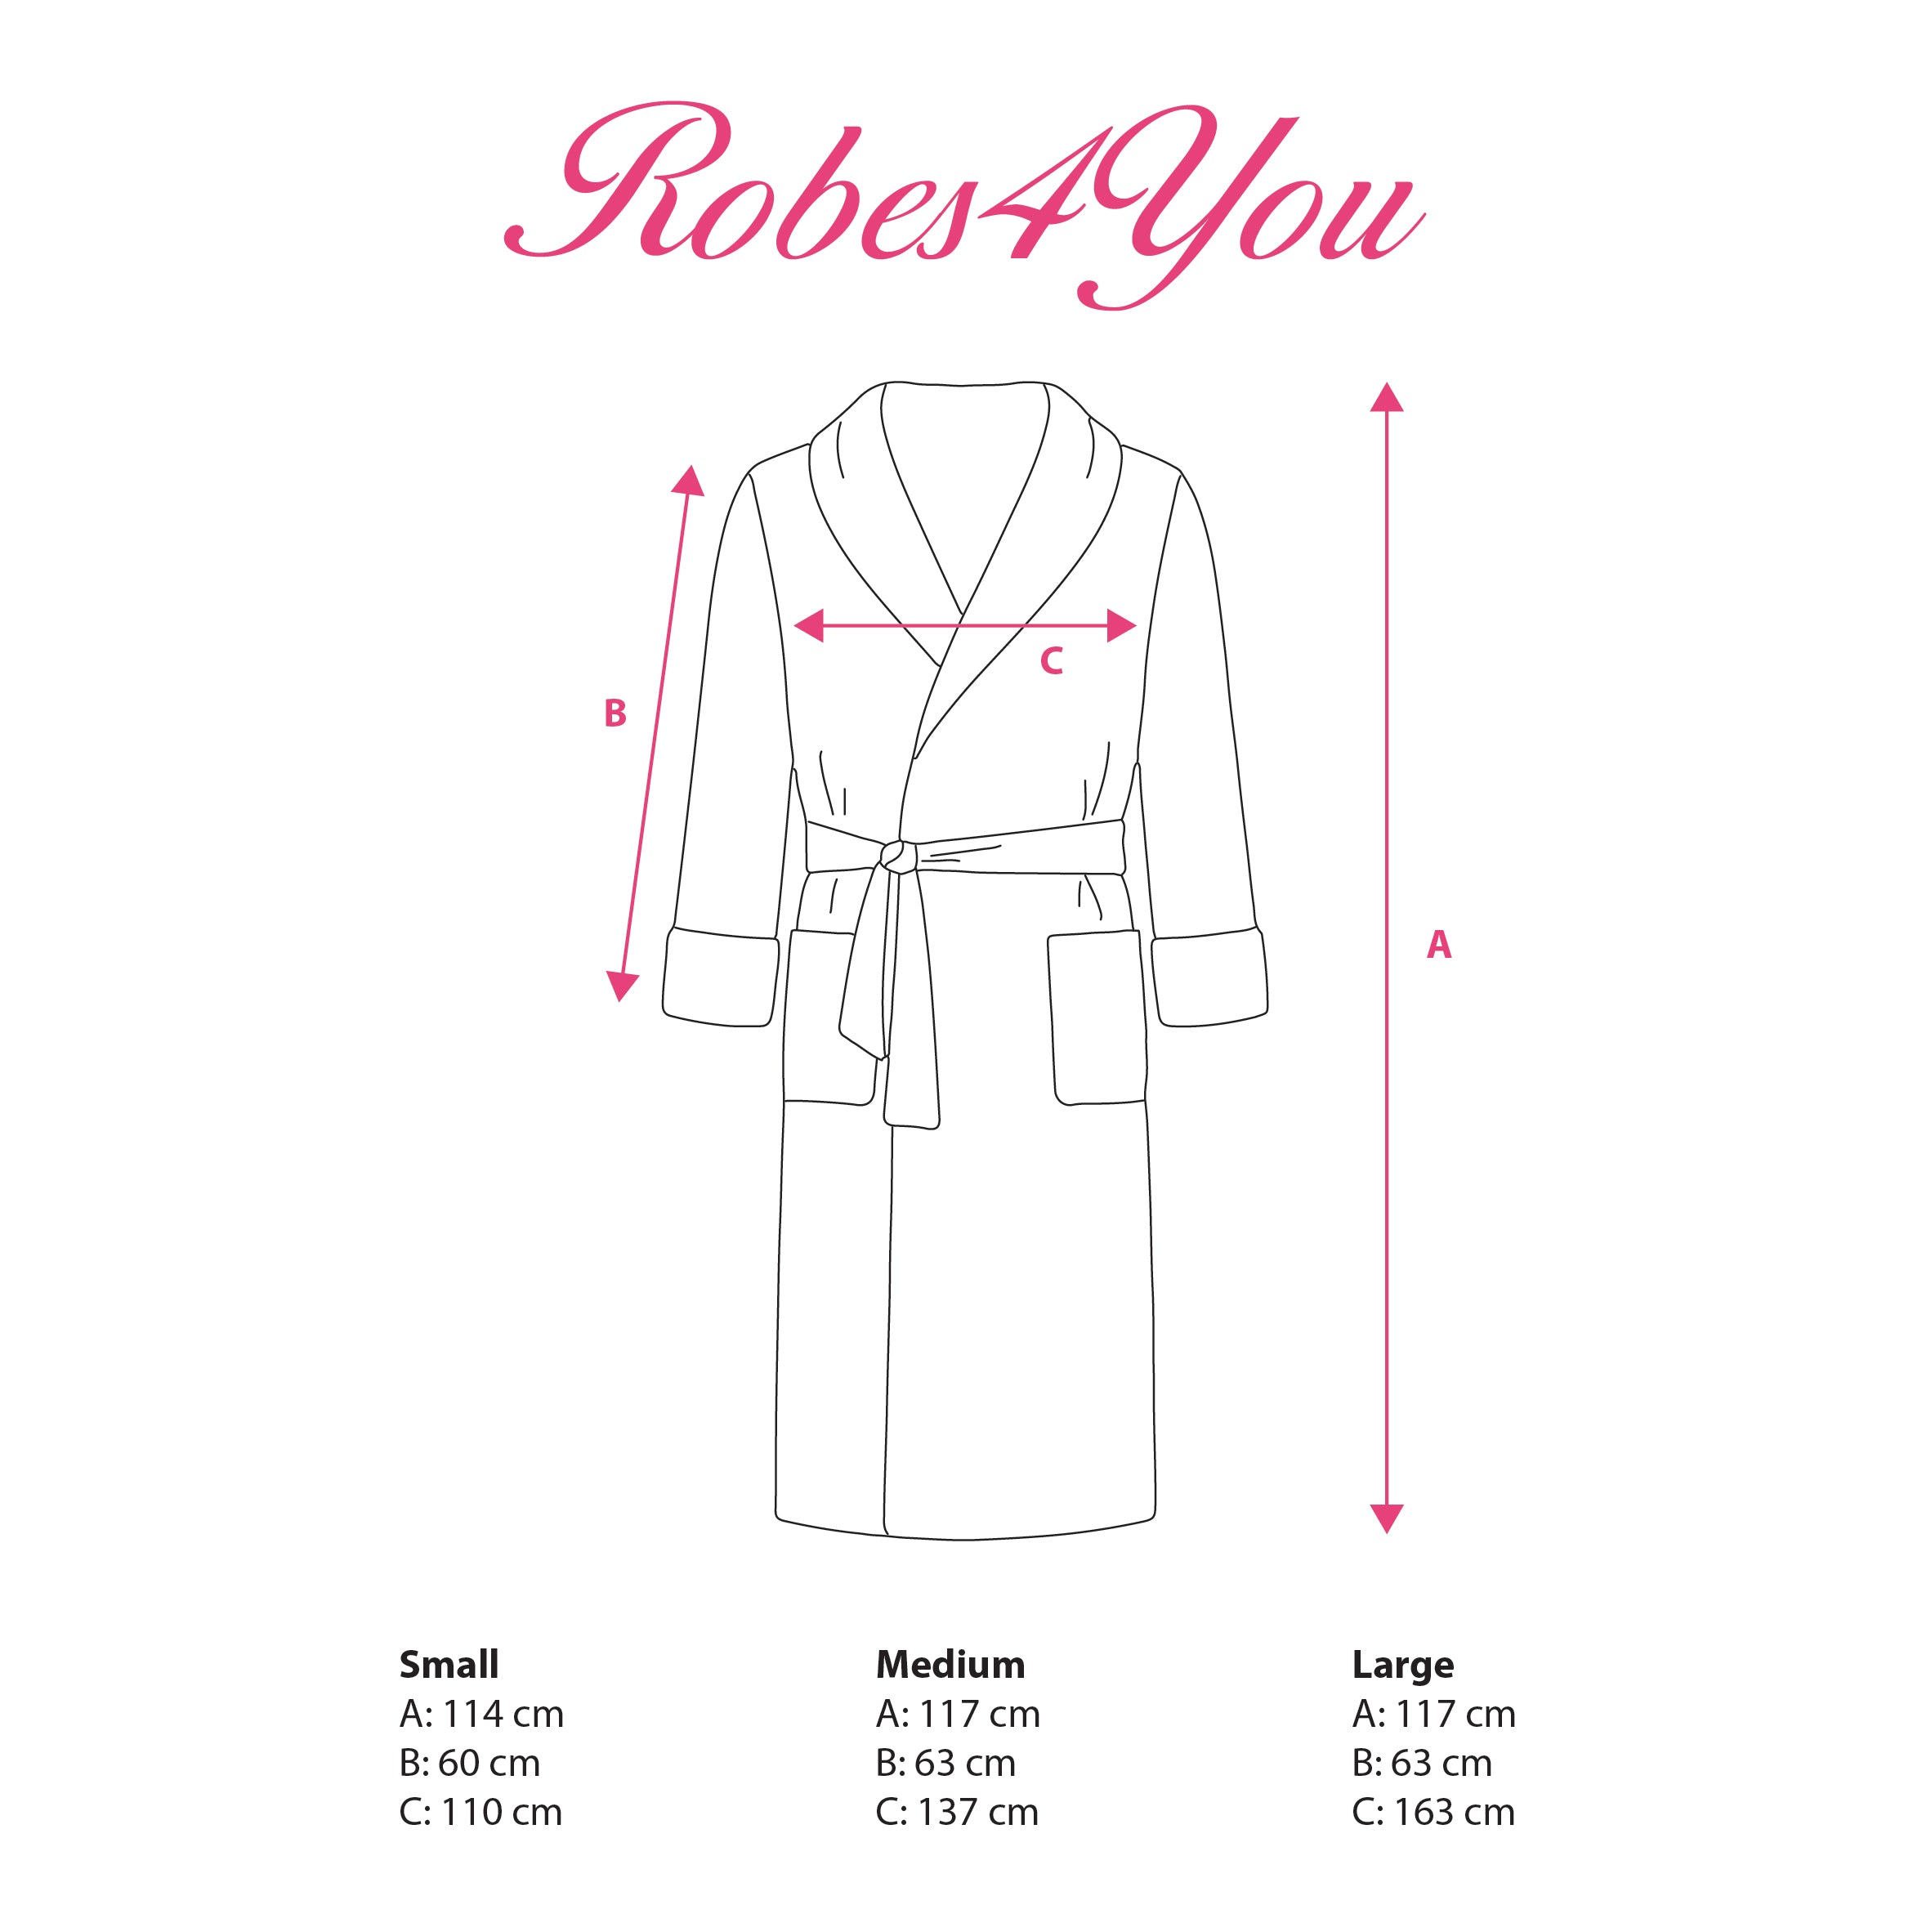 Robes4you sizing measurements